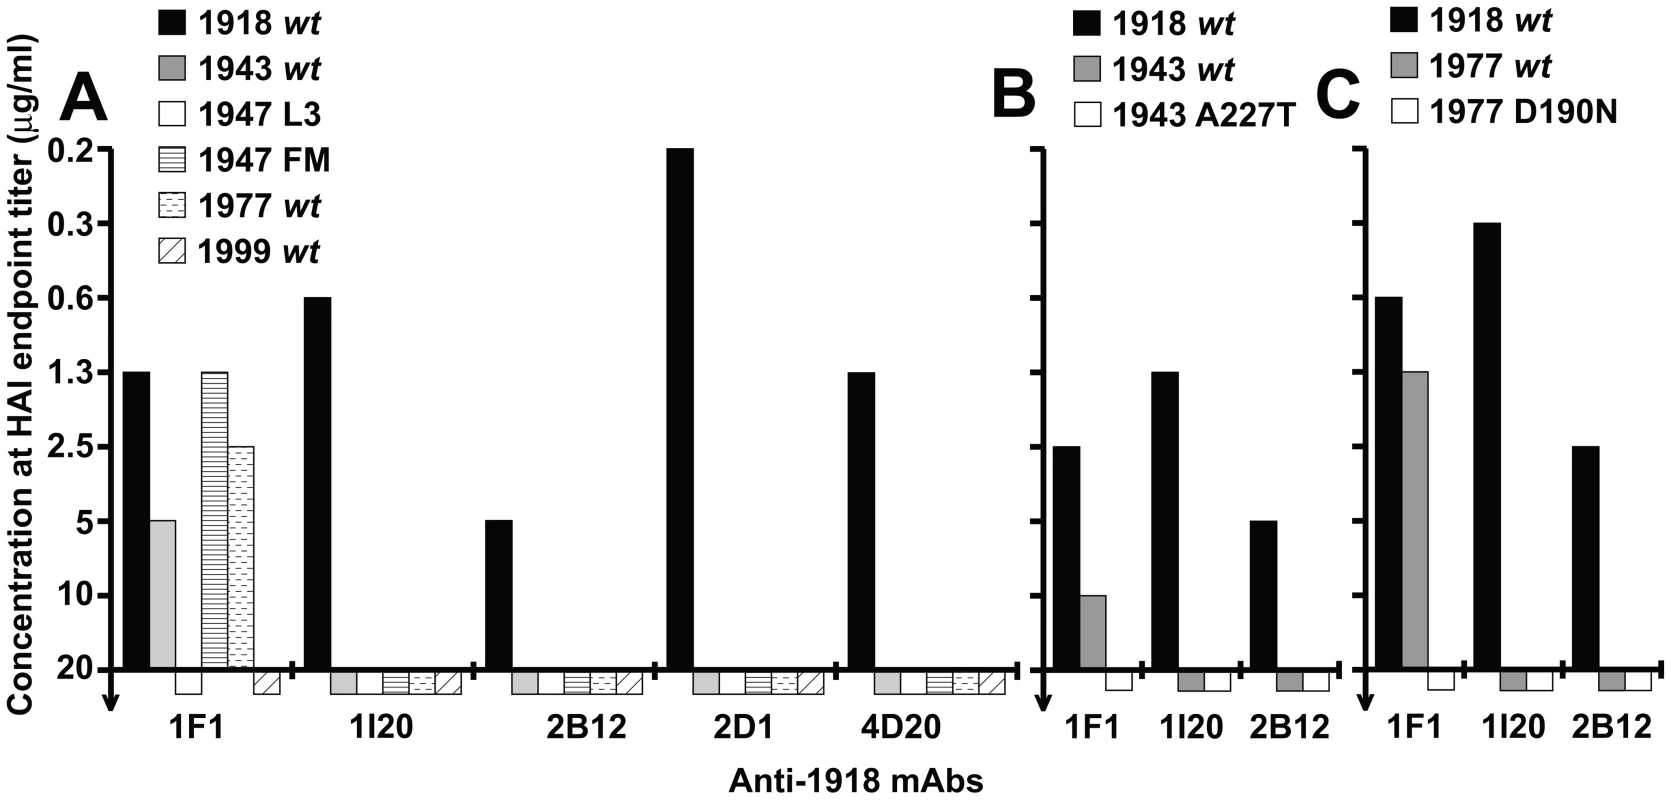 Role of HA residues 190 and 227 in neutralization of 1943 and 1977 H1N1 viruses, respectively.